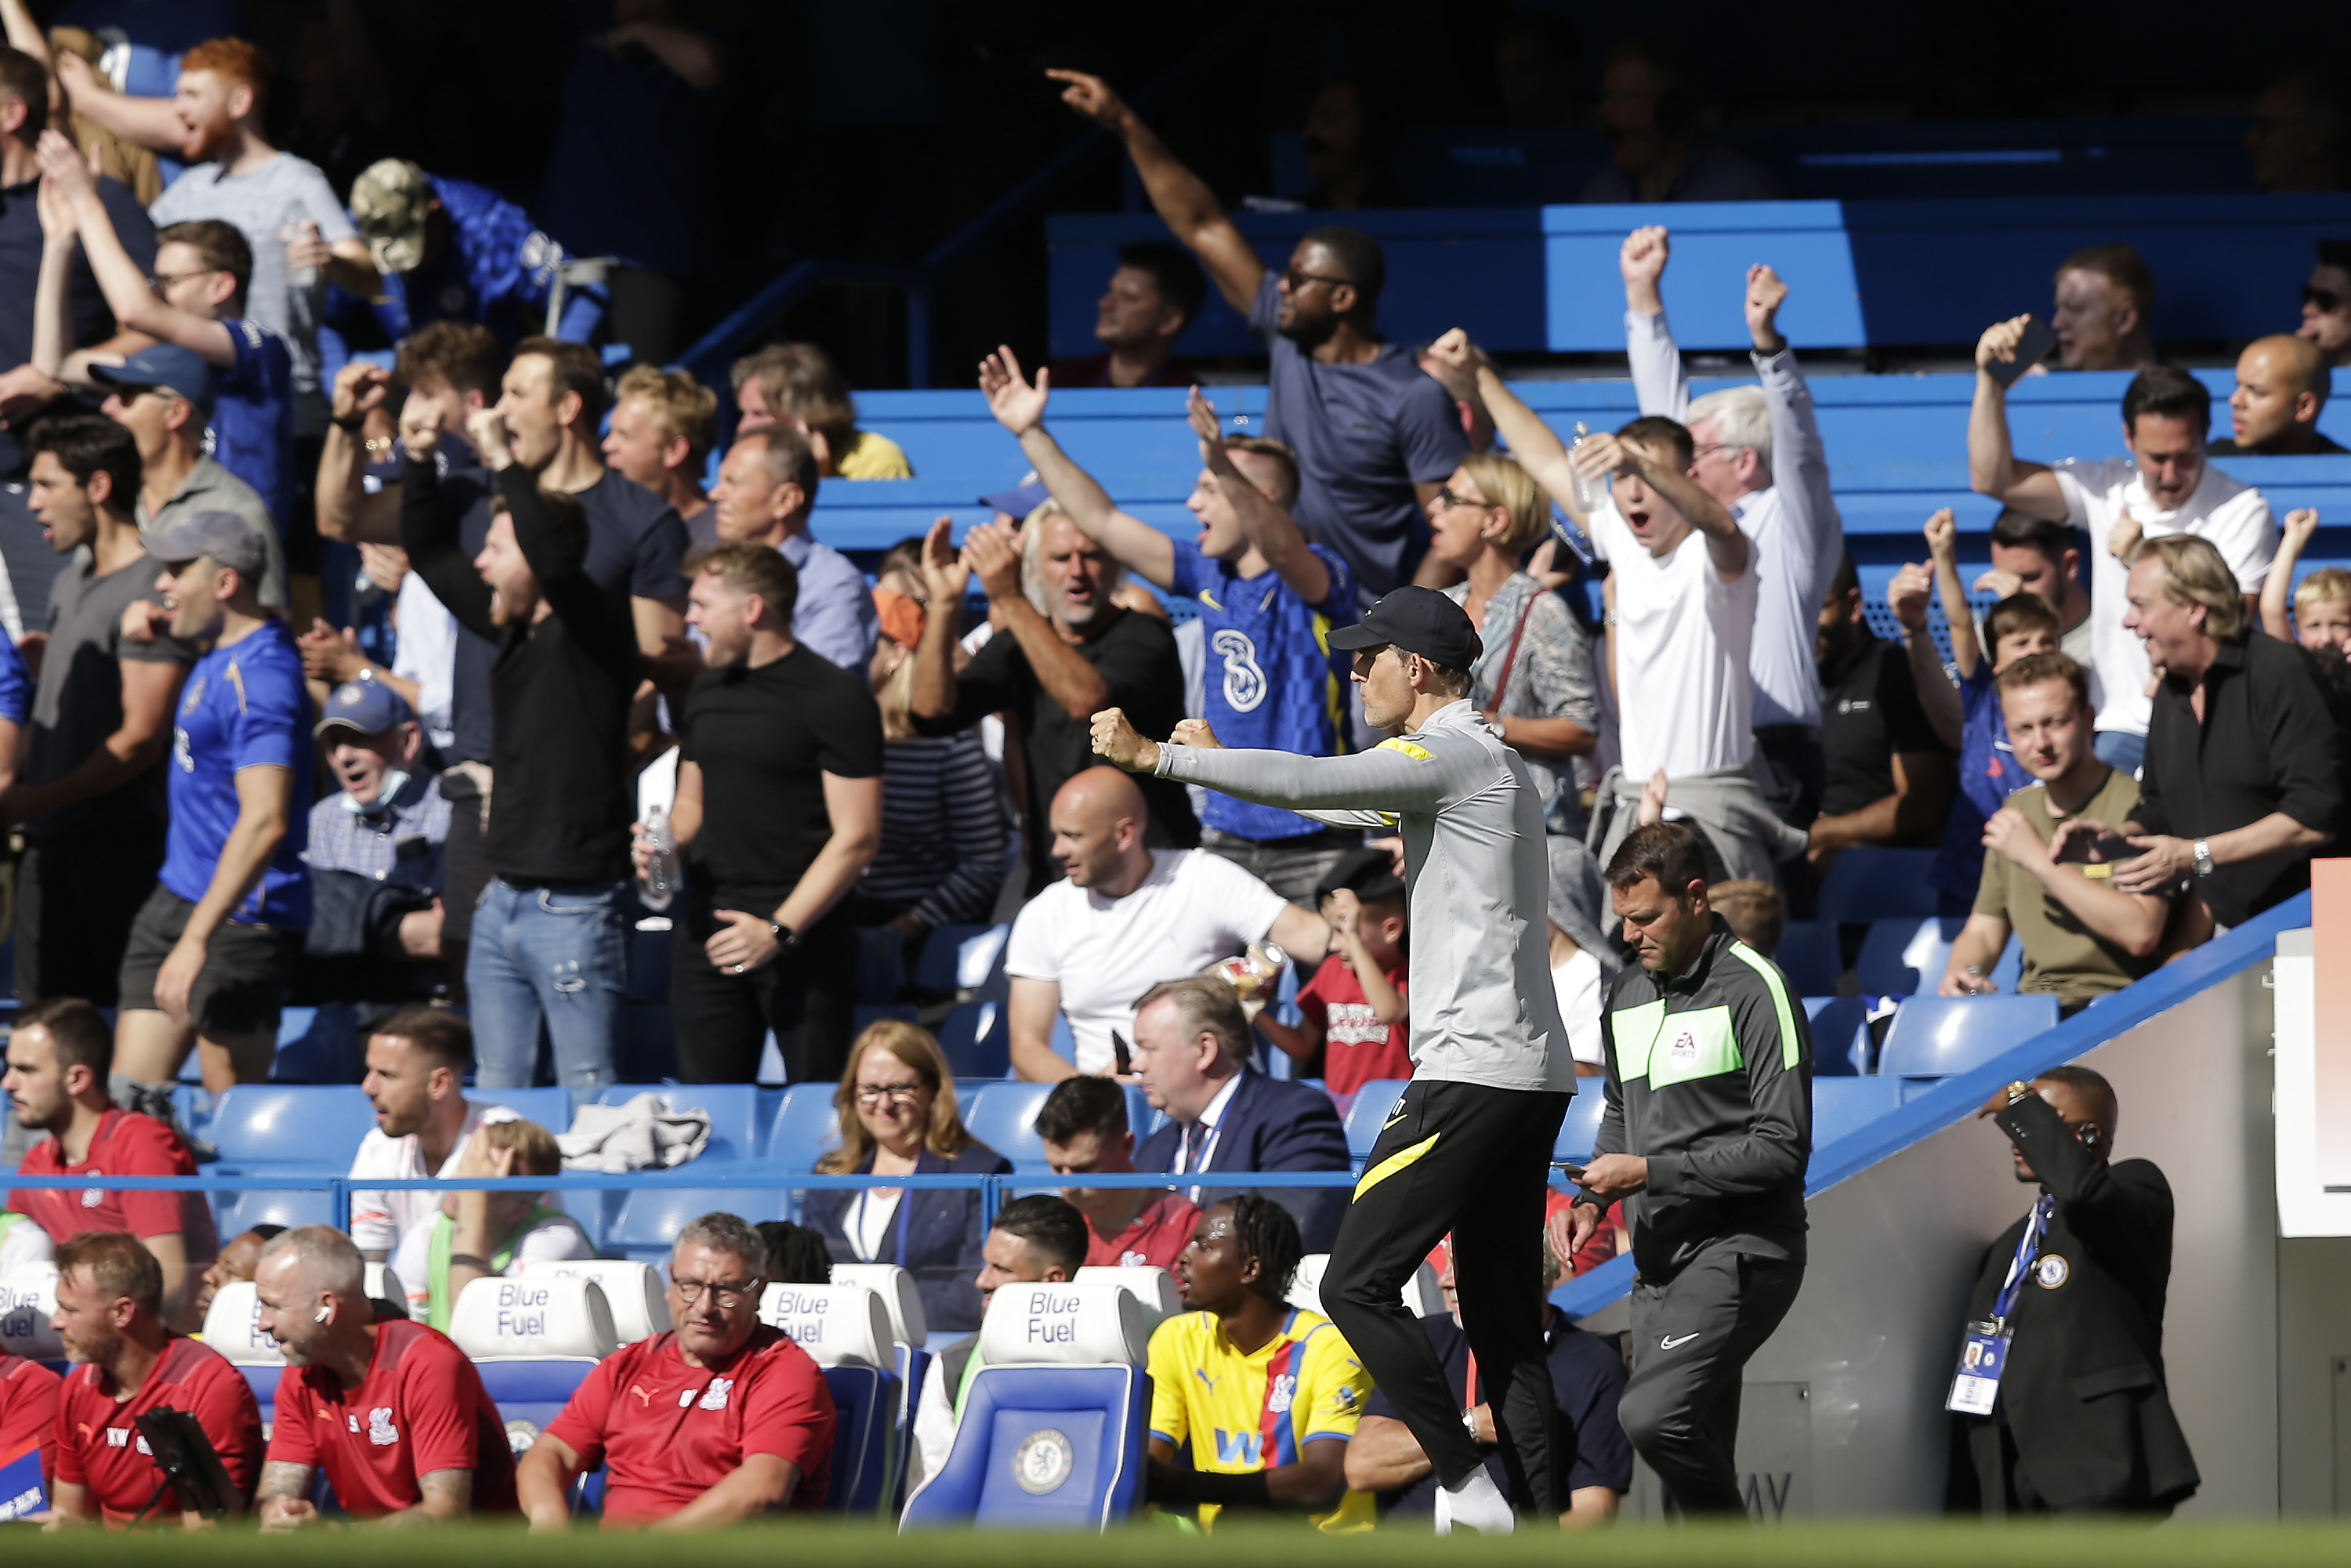 Thomas Tuchel celebrates with fans at Stamford Bridge during Chelsea FC's win over Crystal Palace